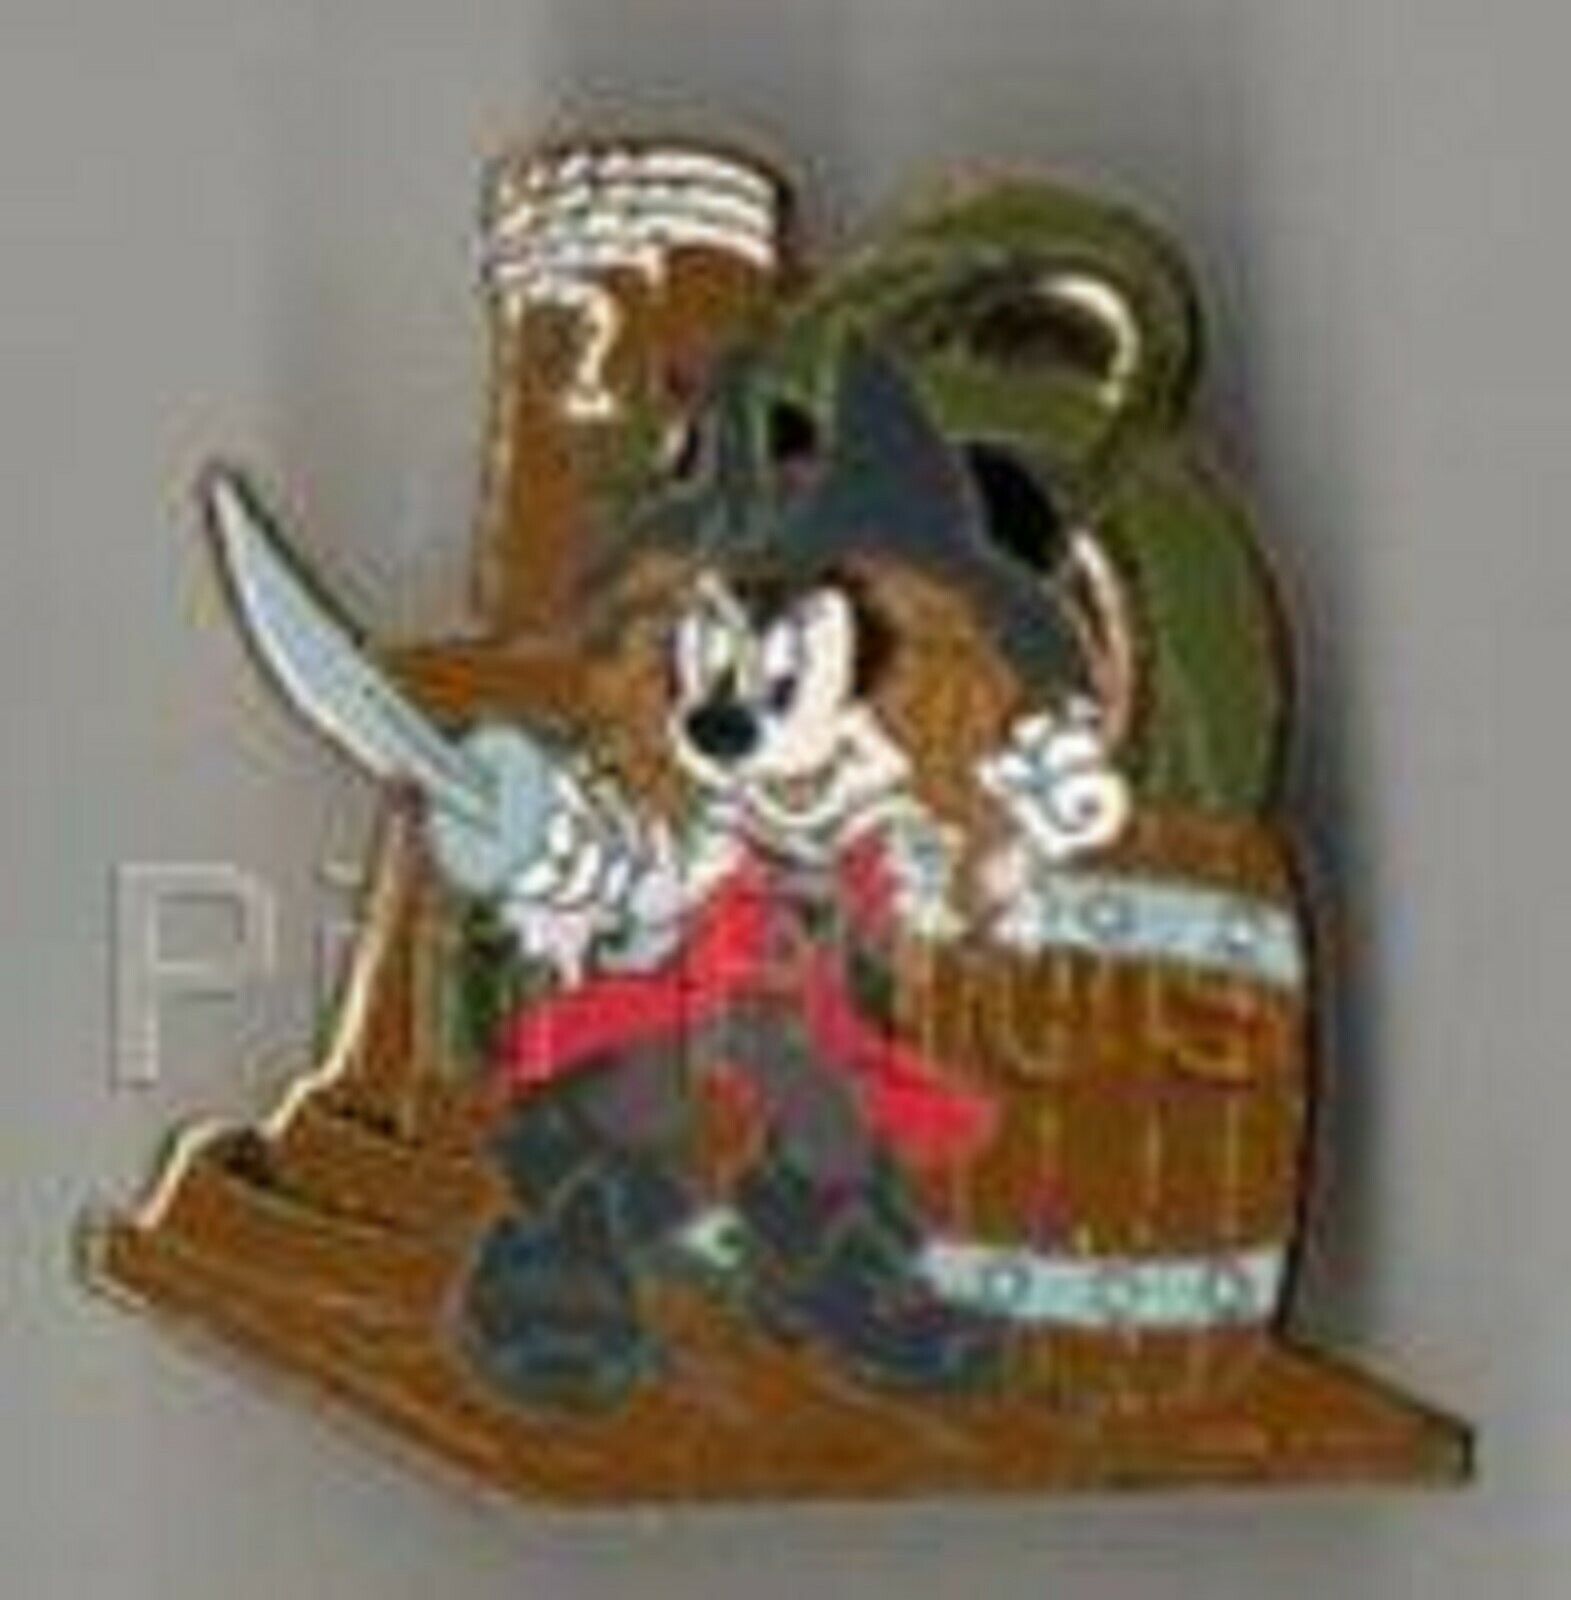 Pirate Minnie Mouse Sword Out Dressed As A POTC. Ride Disney POTC Pirate Pin